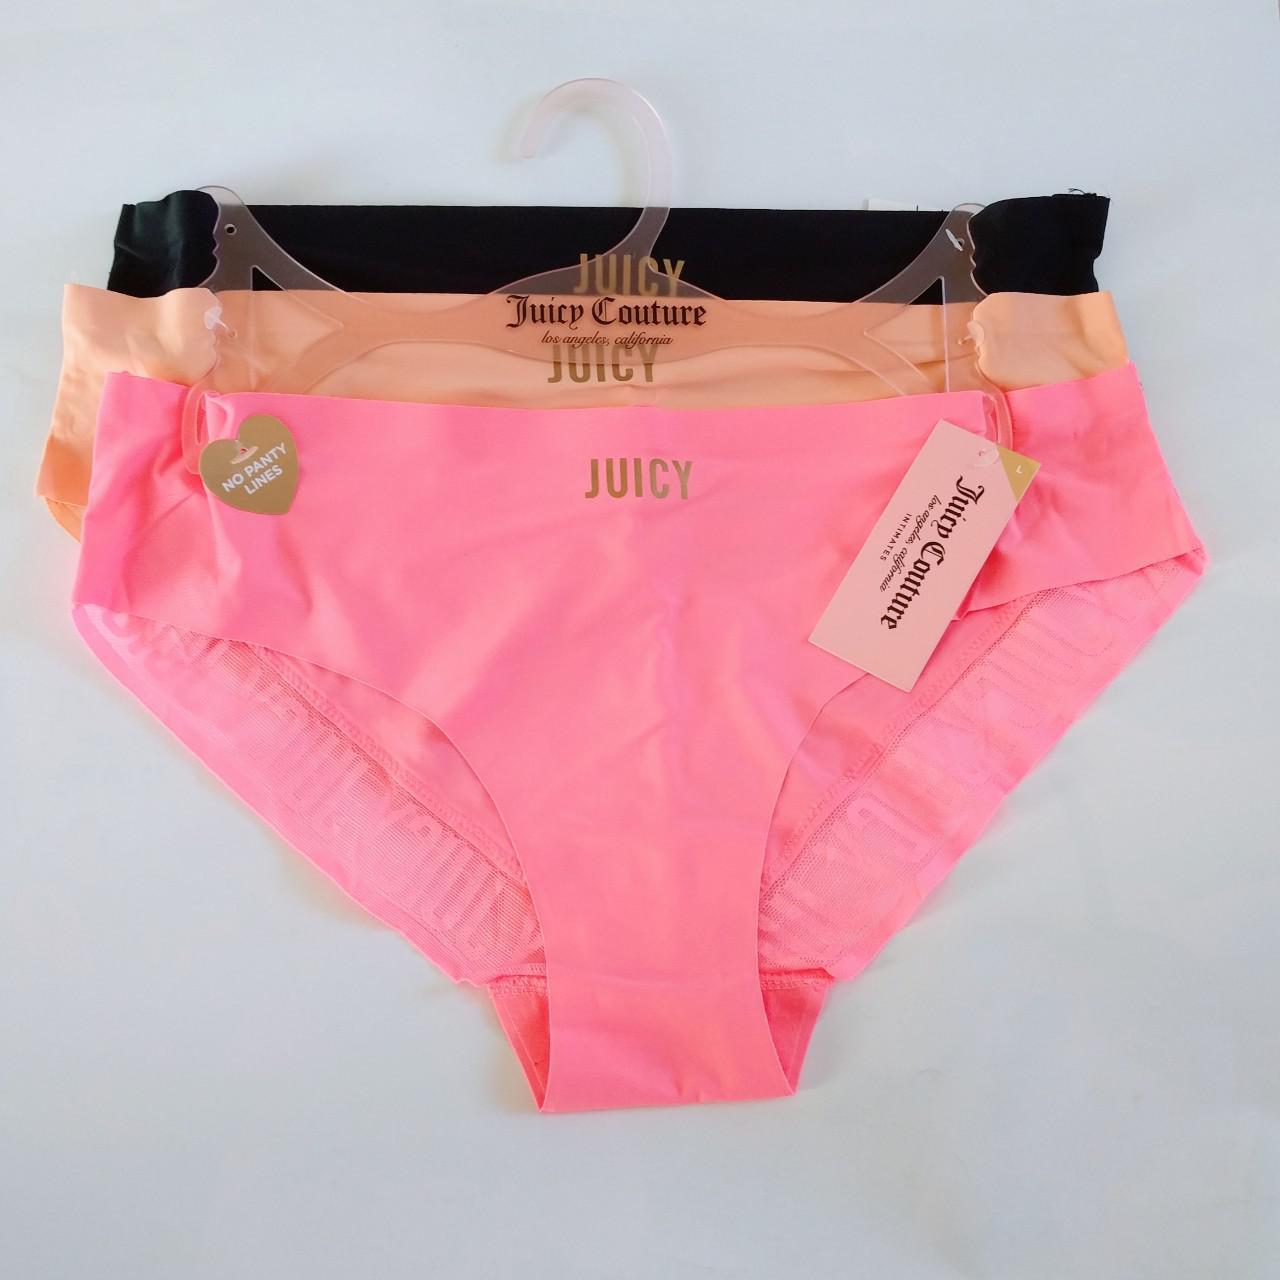 New with tags. Juicy Couture Intimate No Panty Line